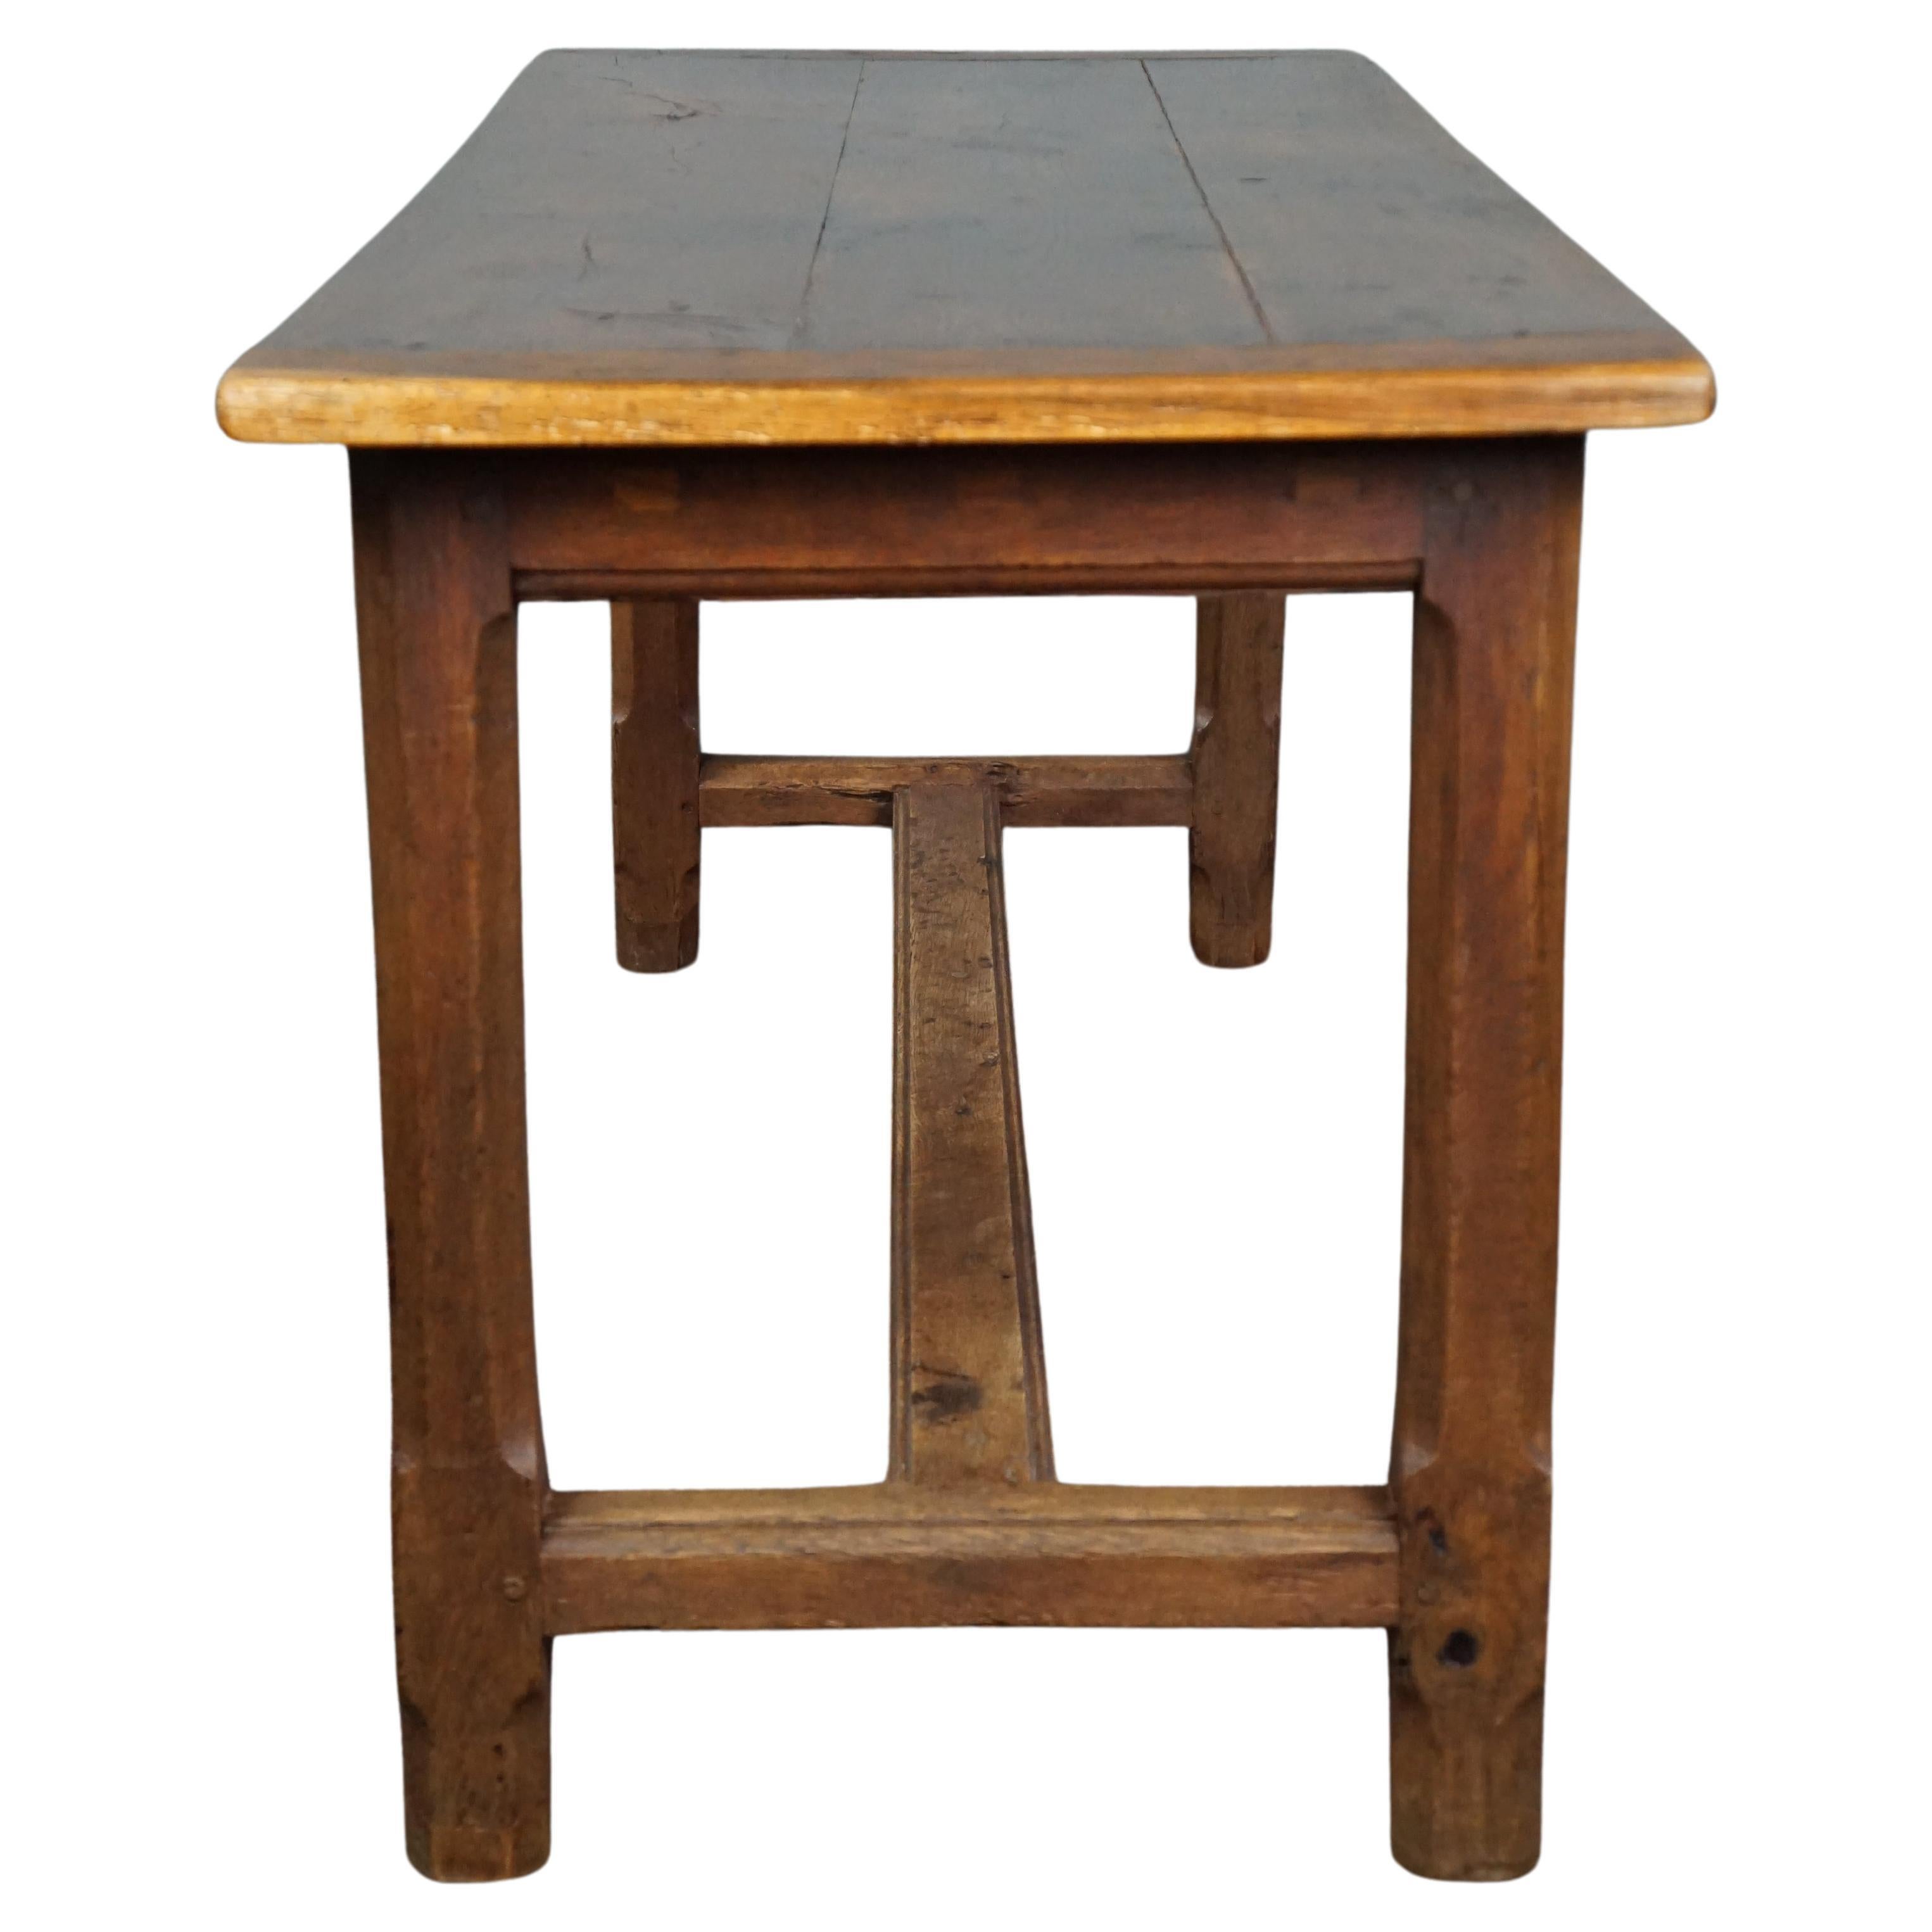 Offered is this sturdy, subtle antique French oak dining table complete with a breadboard and drawer. Do you have limited space in your kitchen or home but still want to enjoy the beautiful and robust appearance of an antique French table? Then you